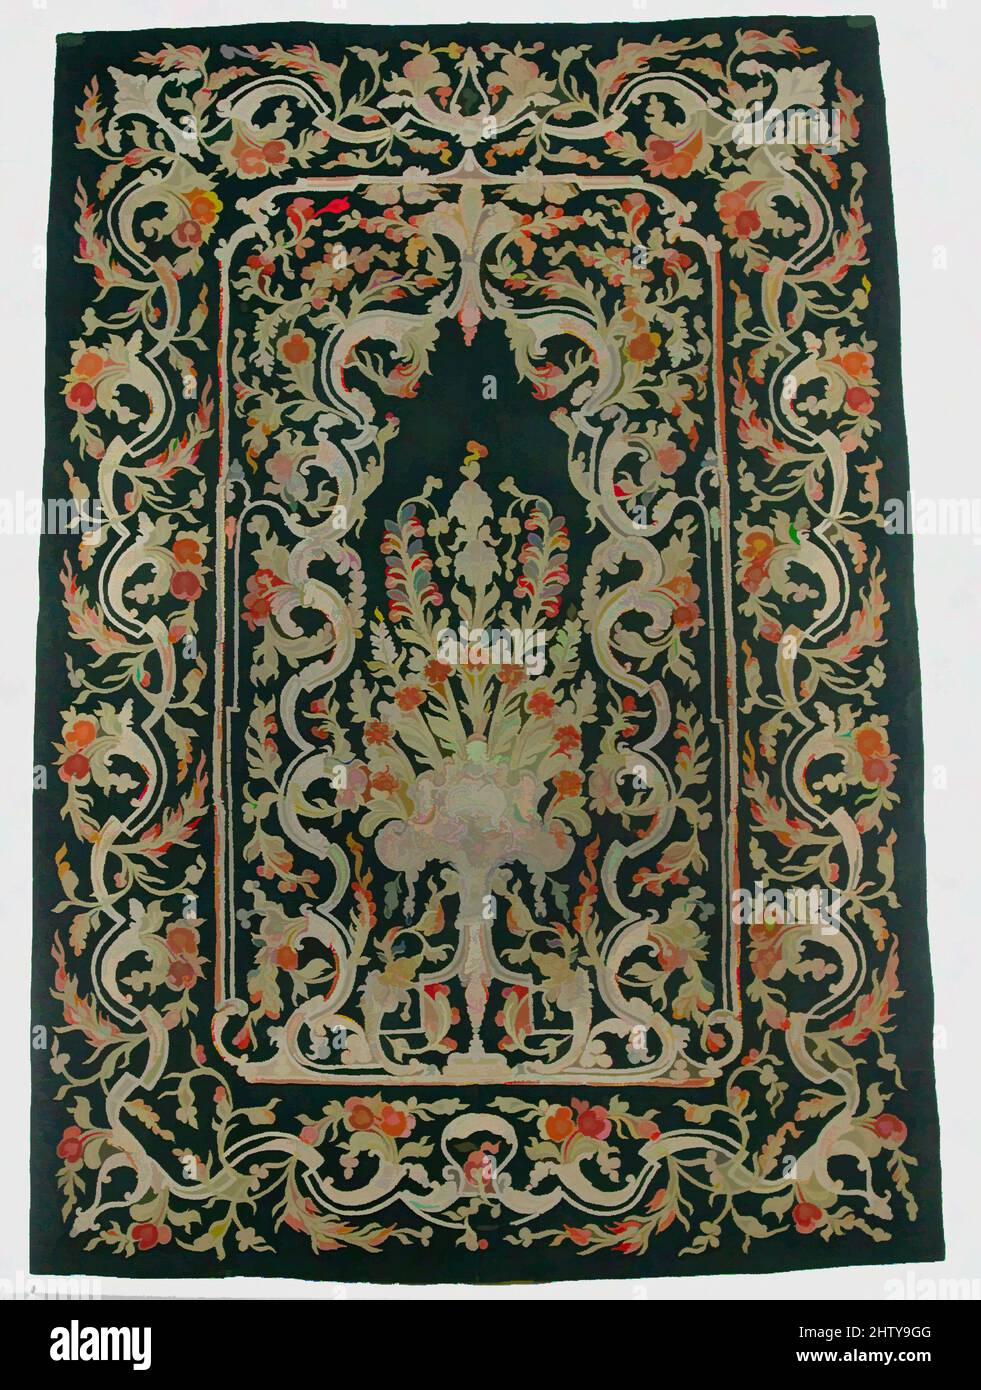 Art inspired by Hanging, 18th century, Attributed to Syria, Damascus, Wool; design in wool applique outlined in silk, broken scrolls in silver thread couched in brickwork pattern; lining of brown satin., H. 70 in. (177.8 cm), Textiles-Embroidered, Classic works modernized by Artotop with a splash of modernity. Shapes, color and value, eye-catching visual impact on art. Emotions through freedom of artworks in a contemporary way. A timeless message pursuing a wildly creative new direction. Artists turning to the digital medium and creating the Artotop NFT Stock Photo